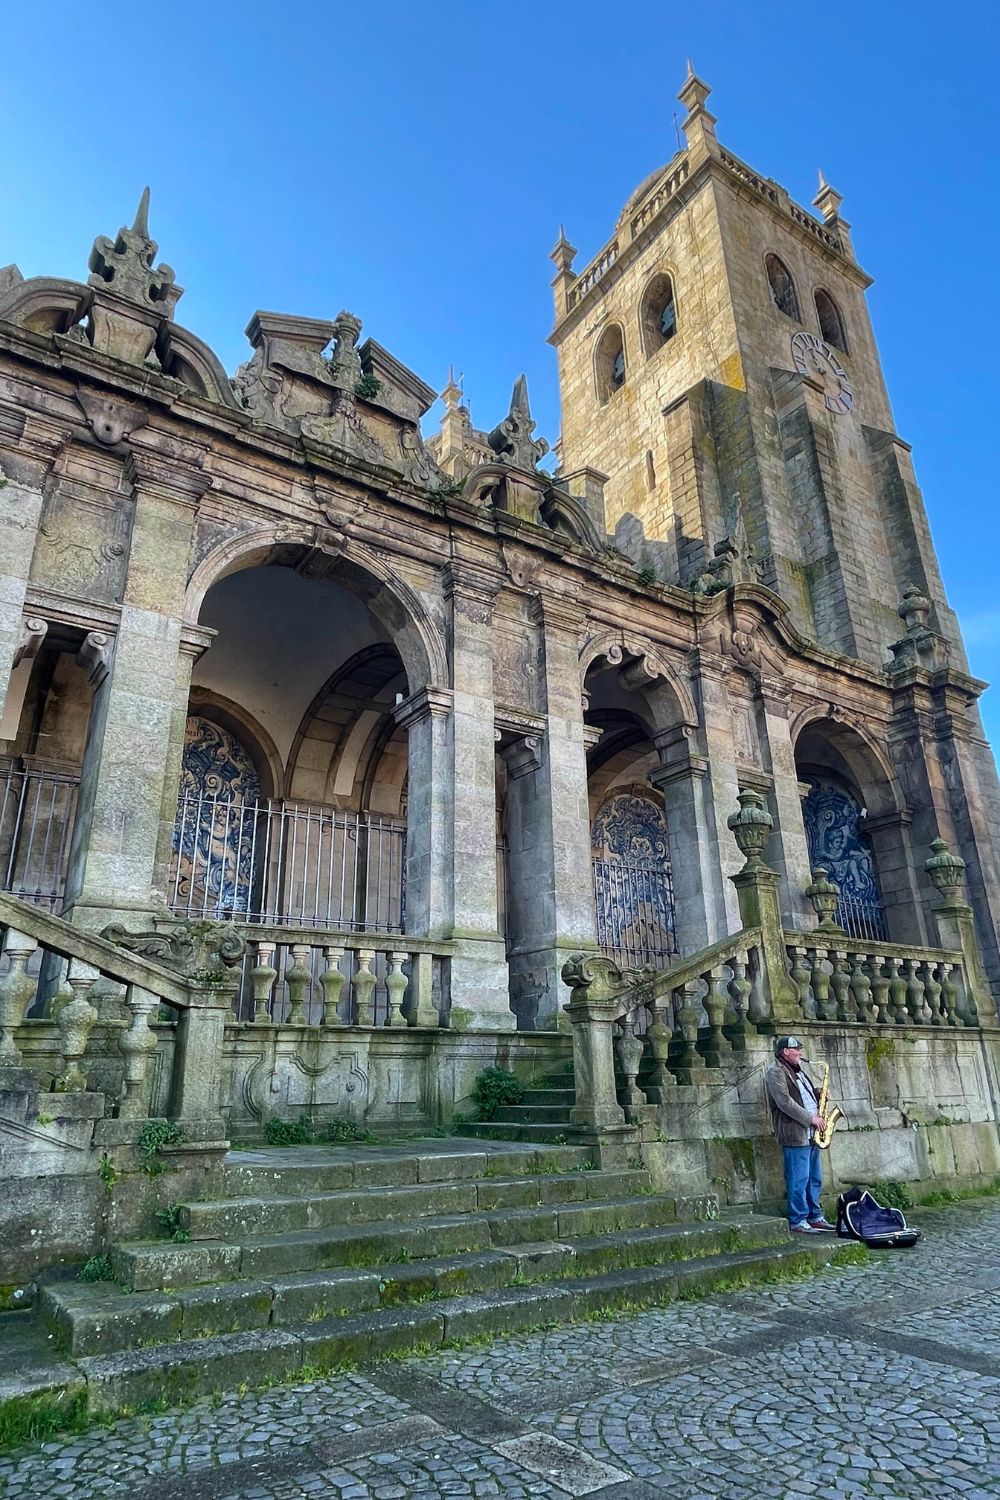 A saxophonist plays in front of the aged stone façade of an ornate church in Porto, under a clear sky, with a backdrop of historic architecture.